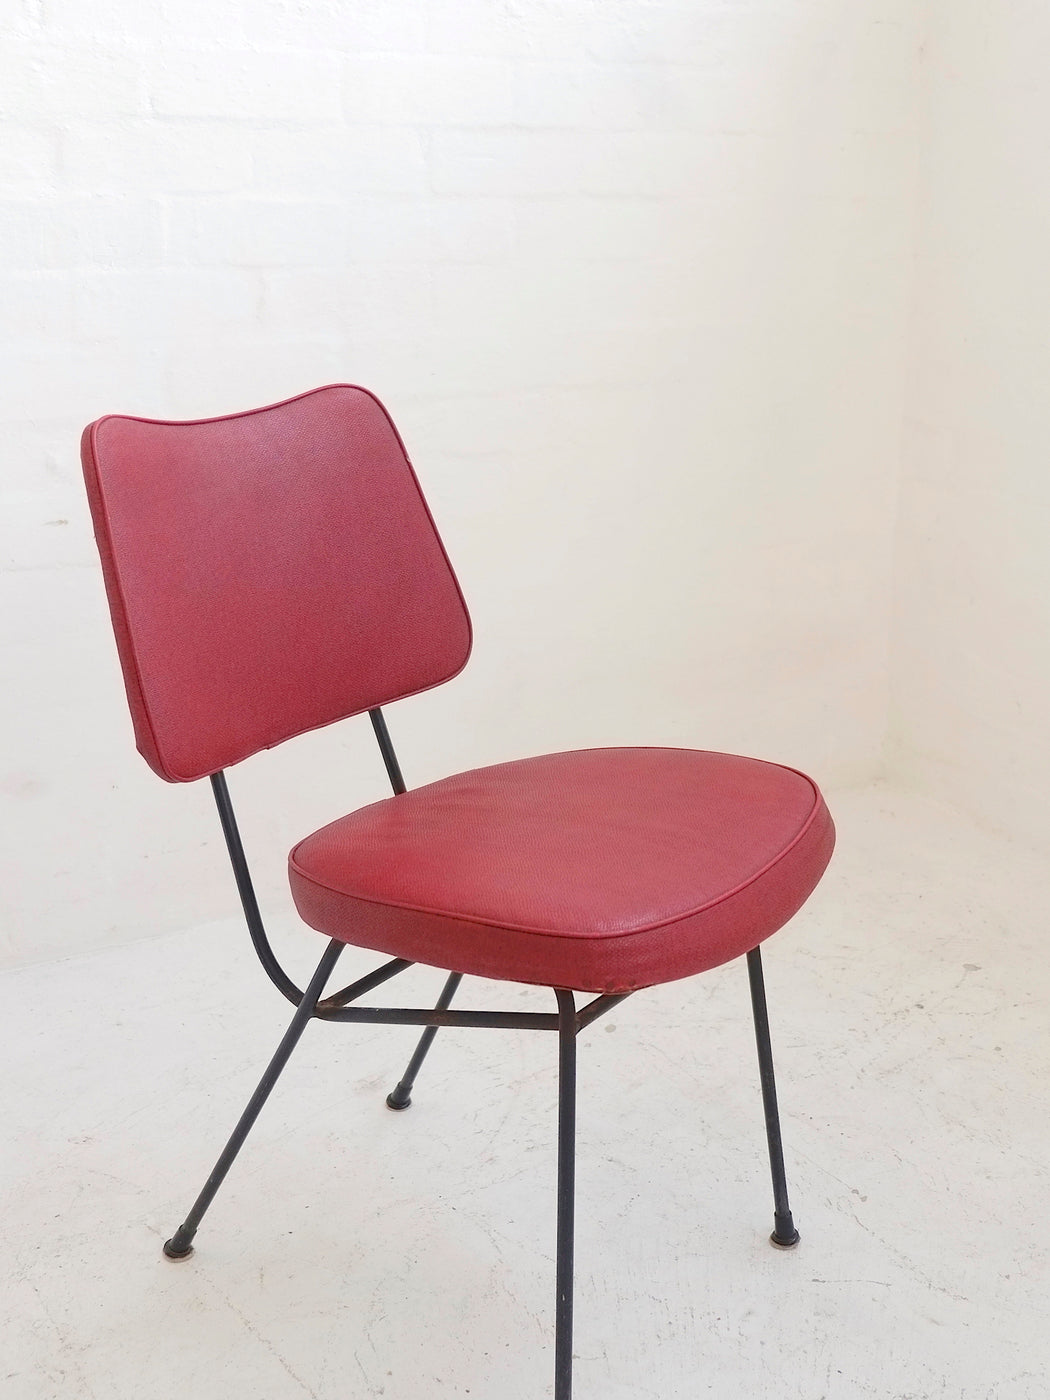 Grant Featherston 'TY' Chair